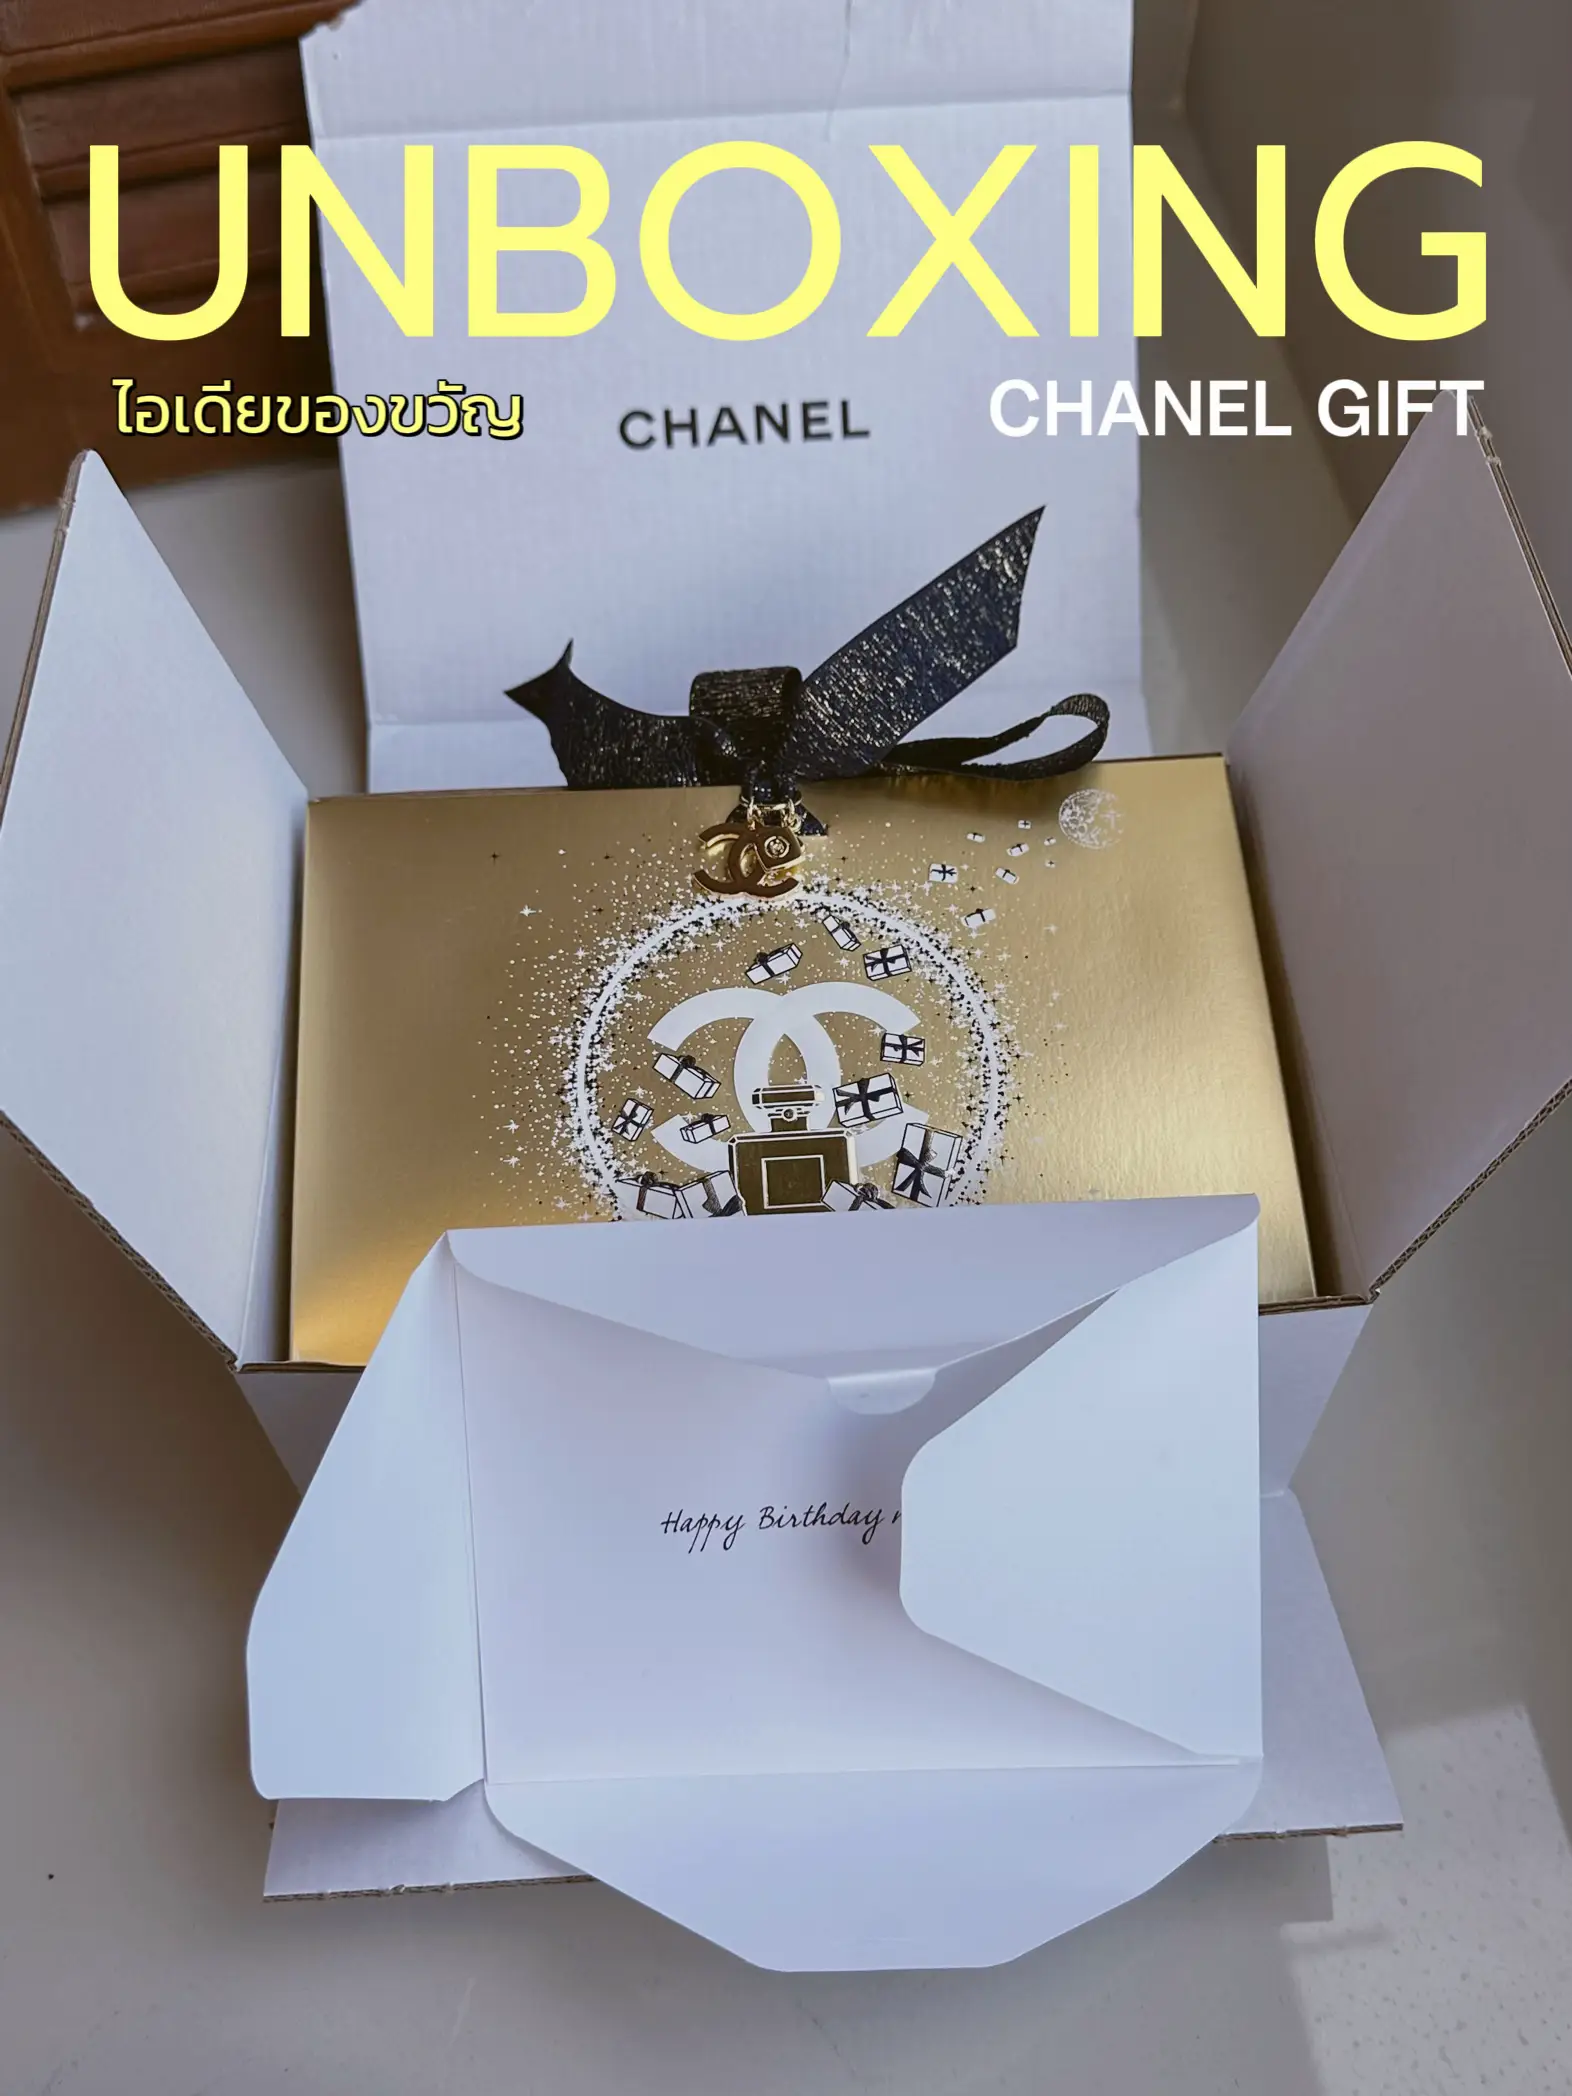 UNBOX CHANEL GIFT Buy Chanel Gift Package Very Cute💄💋, Gallery posted by  Mildsjourney